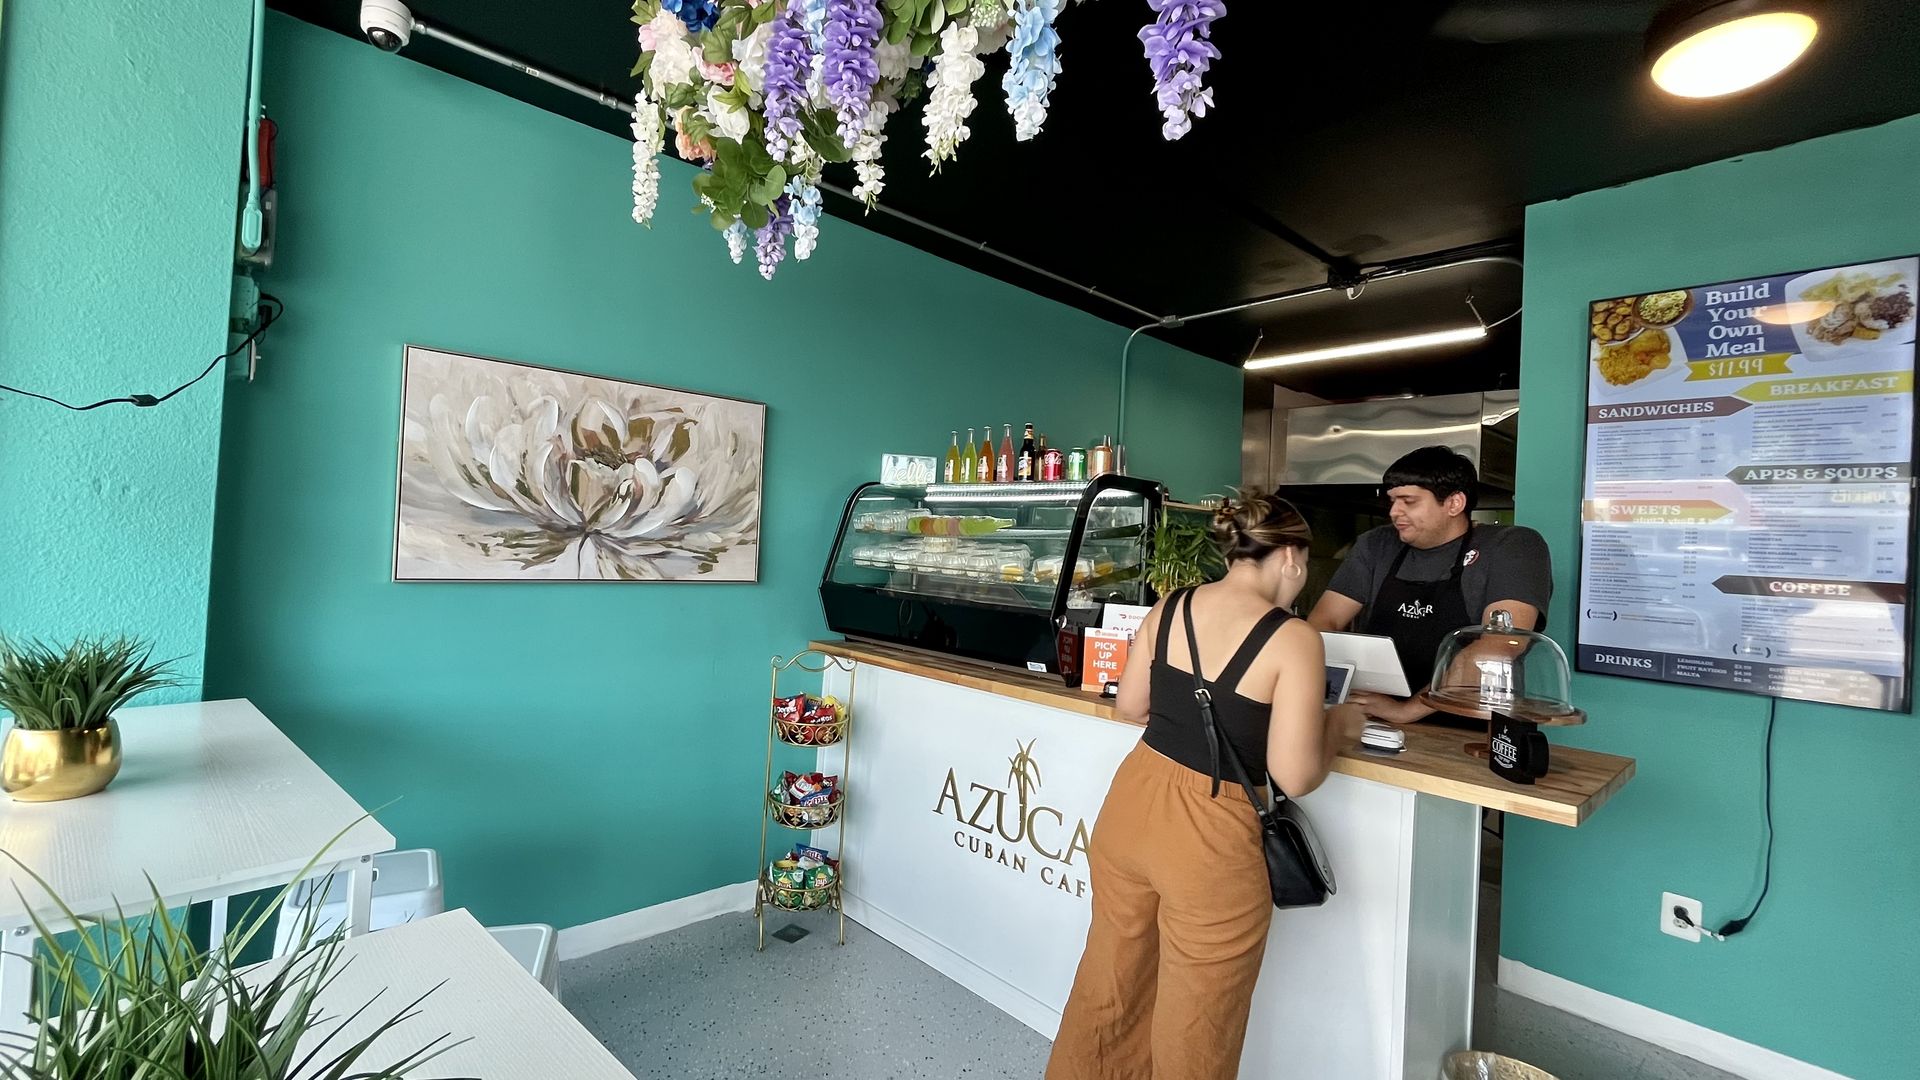 A man in a gray shirt and black apron takes the order of a woman in a black top and orange pants orders  at a white counter that says Azucar Cuban Cafe. The walls are bright teal, and purple, white and blue flowers hang from the ceiling.